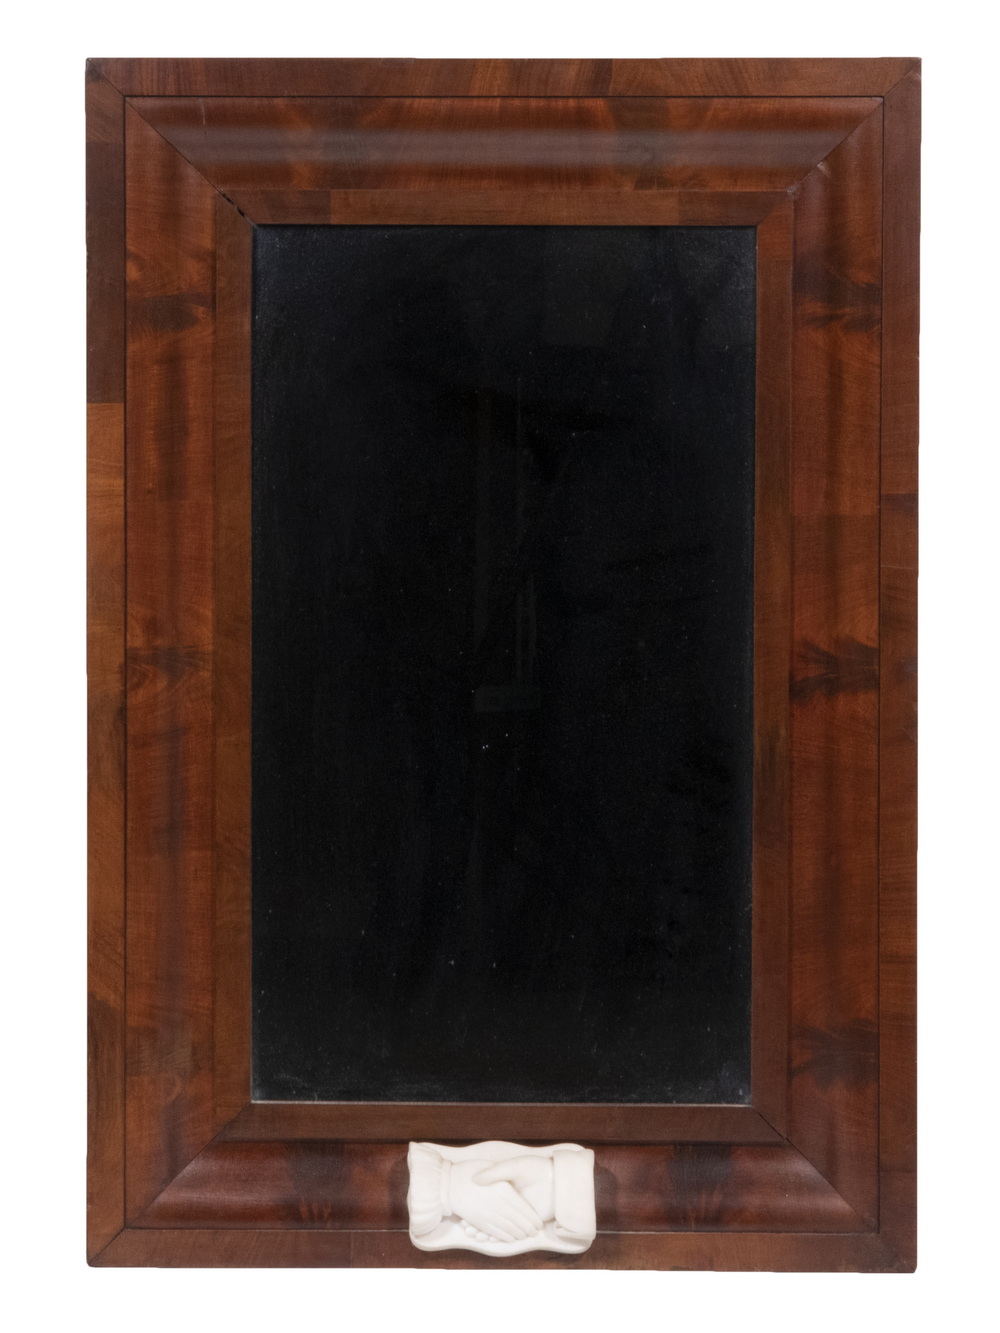 MAHOGANY OGEE MIRROR WITH MARBLE 302812